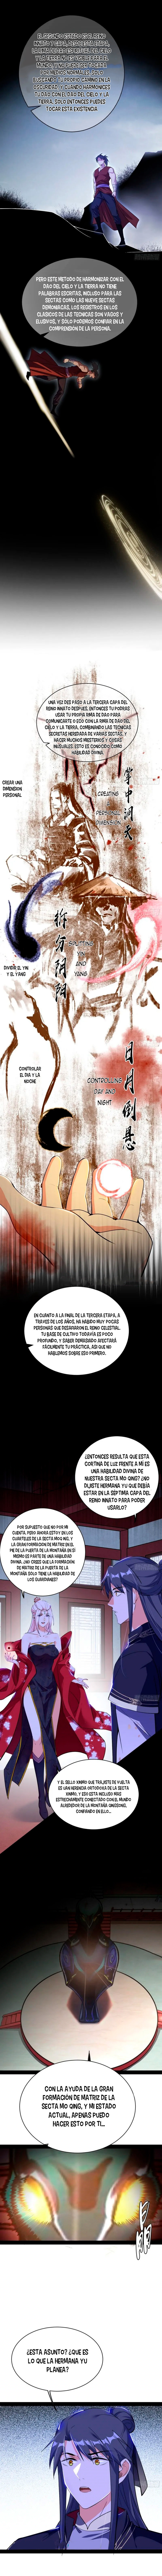 Manga Soy un dios maligno Chapter 317 image number 2